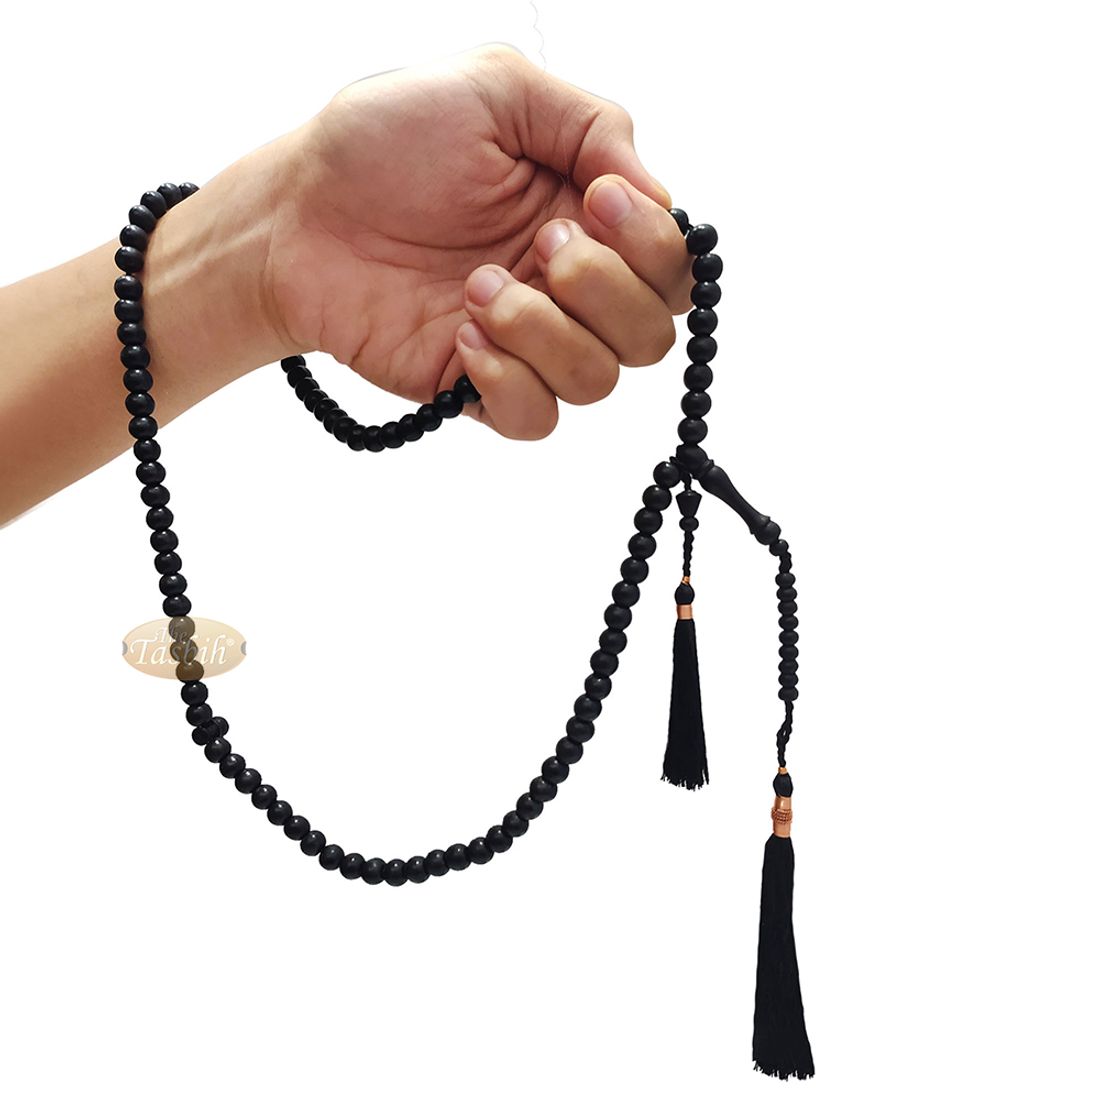 Black Citrus Wood Handcrafted Tasbih with Copper Wire-decorated Tassels